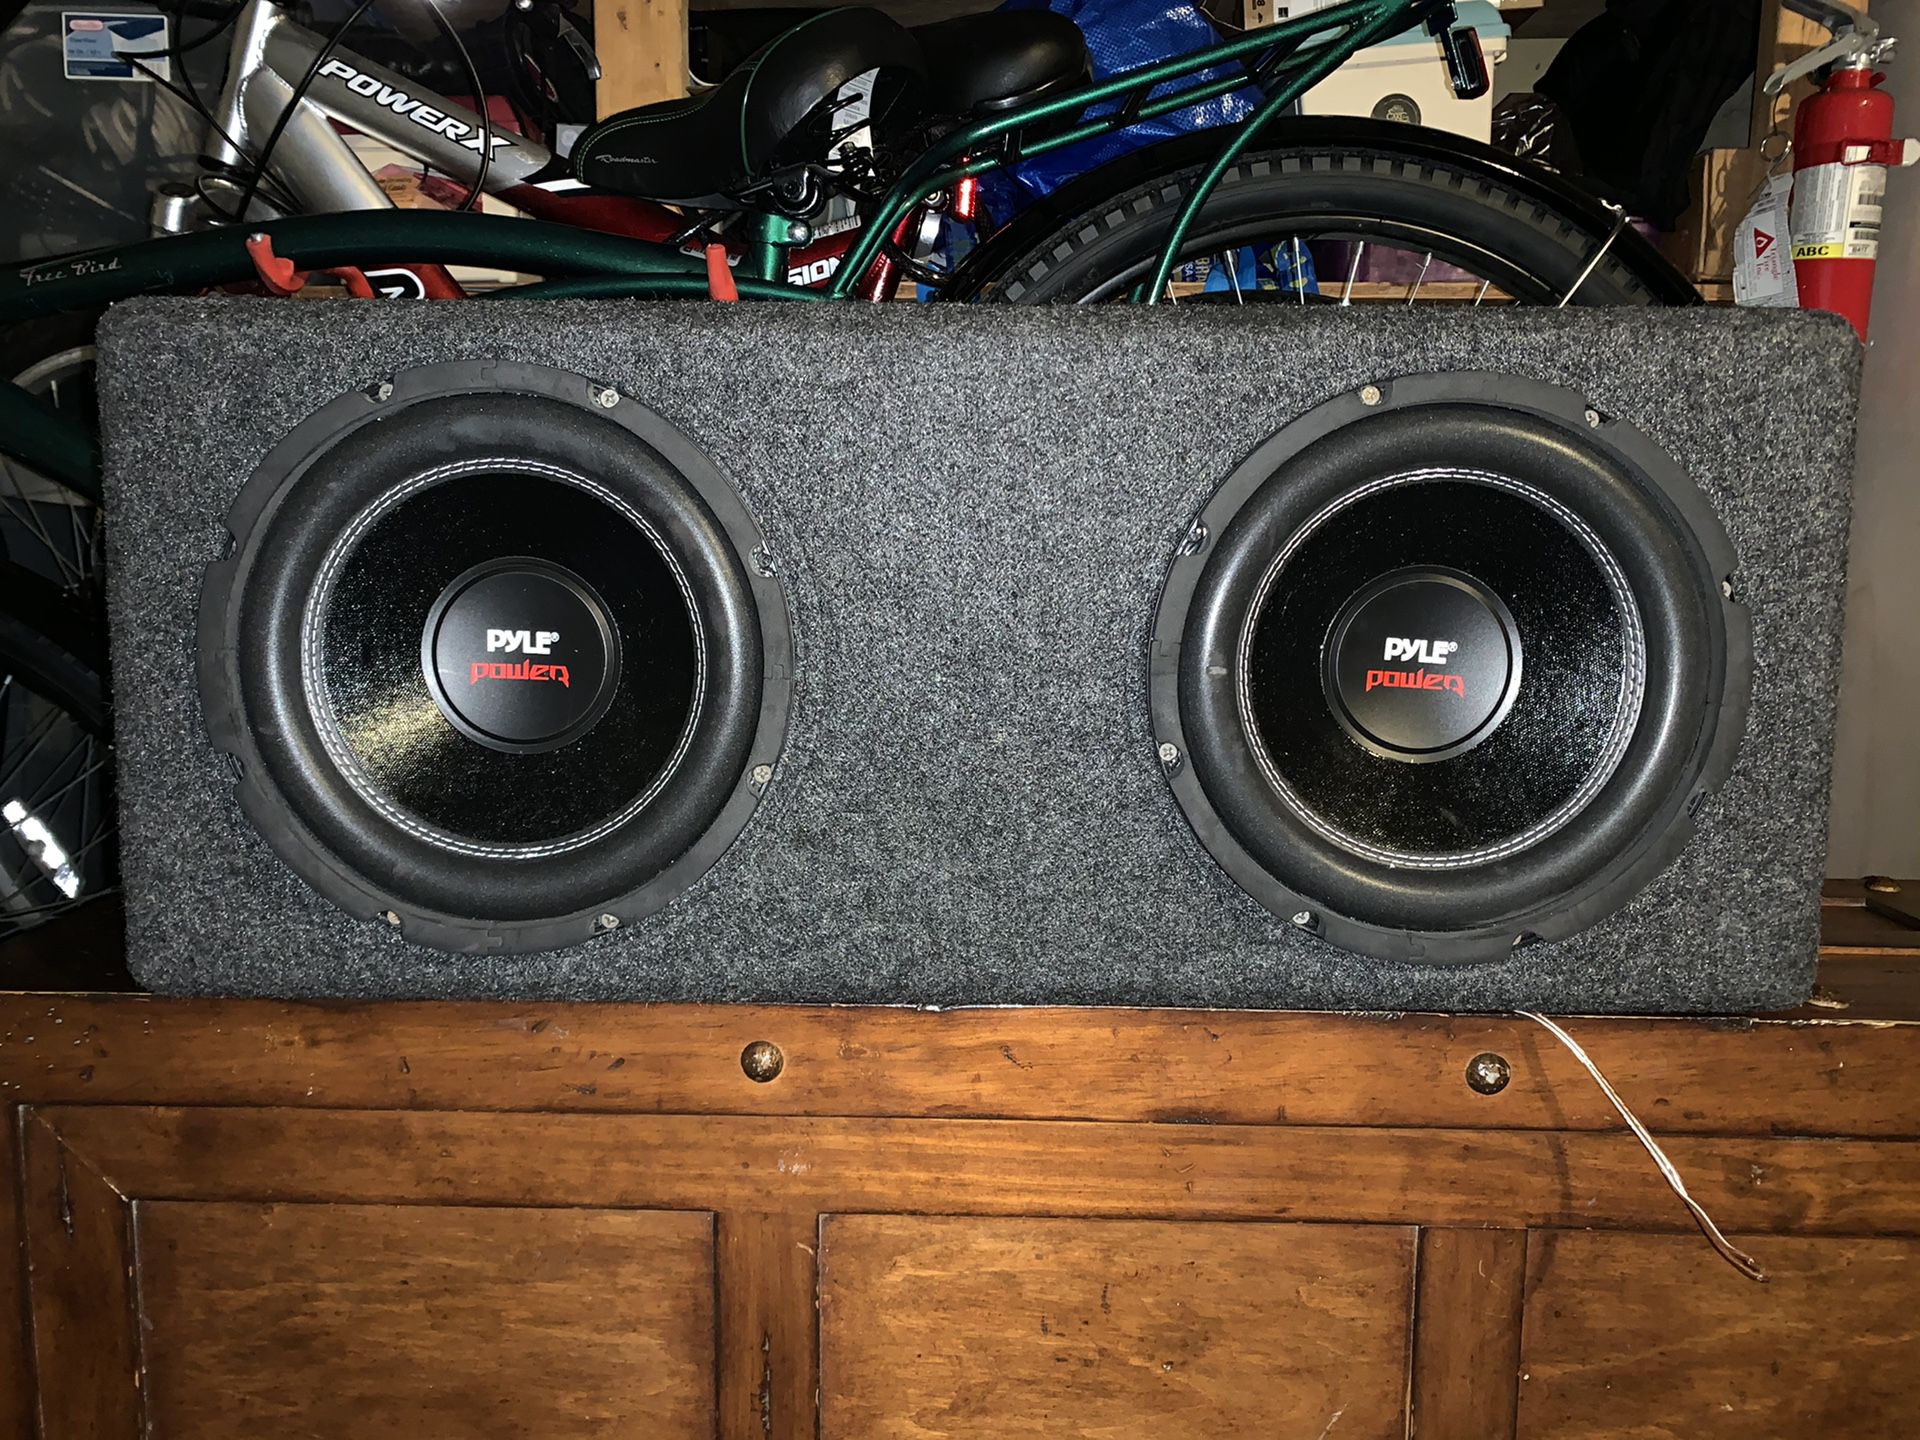 Two 10” Pyle Speaker’s with MMATS PRO Audio Amplifier